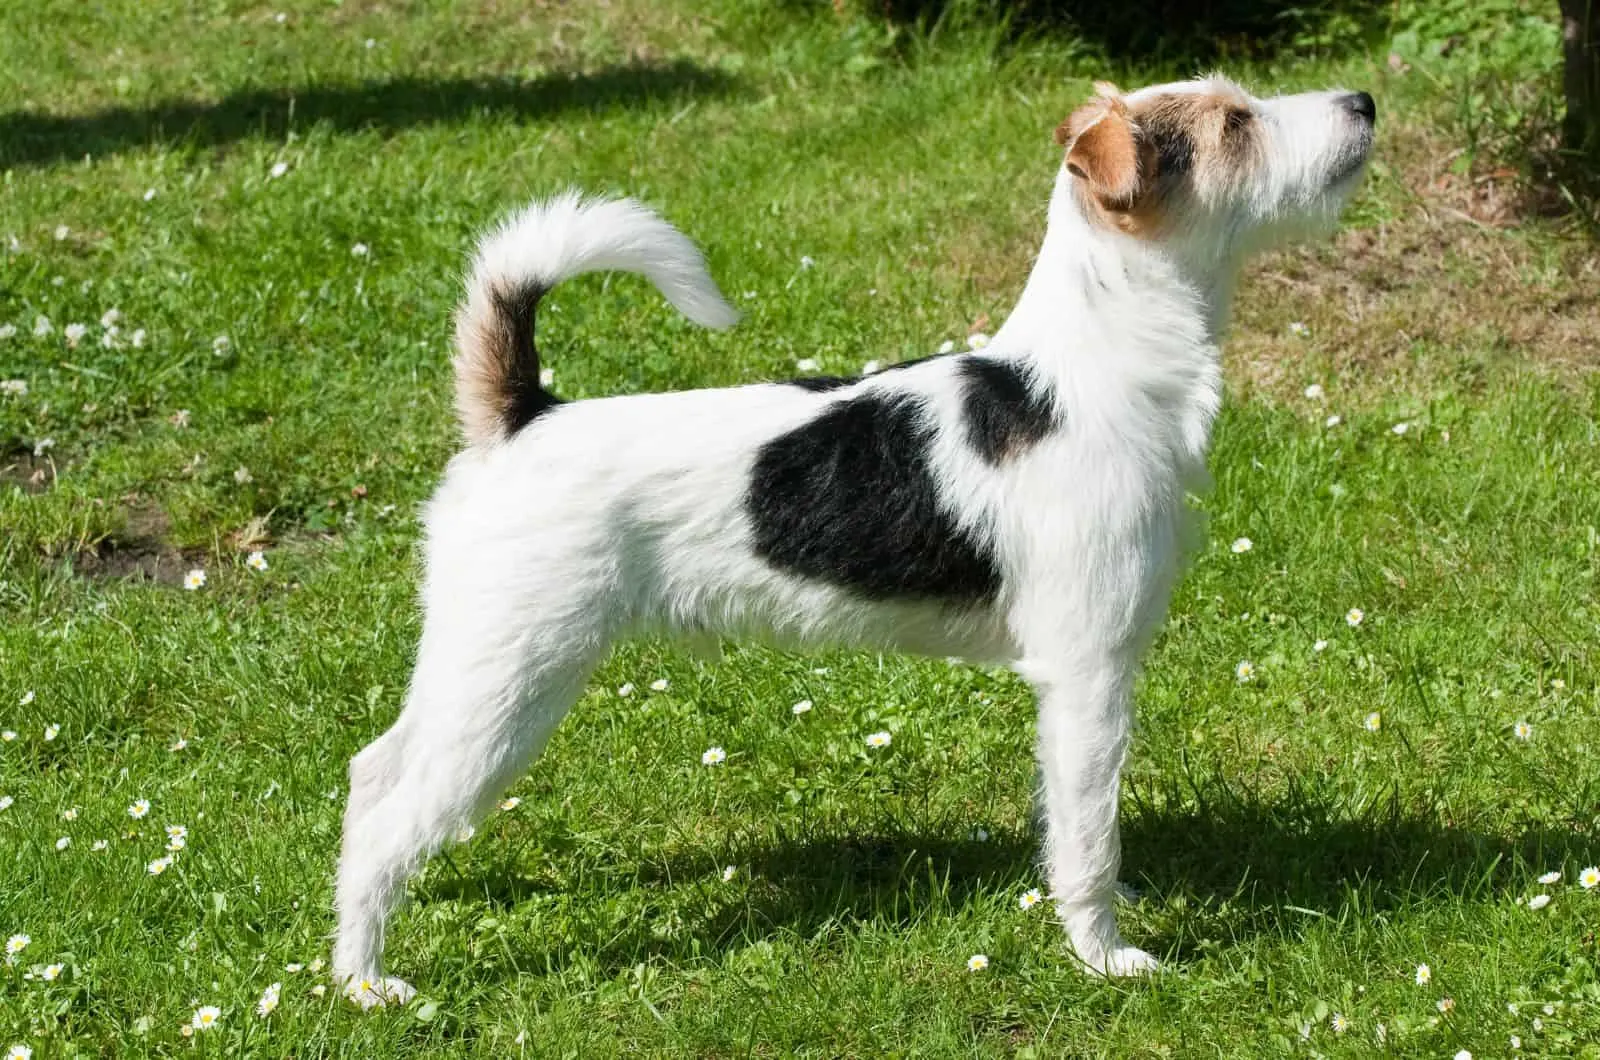 Parson Russell Terrier standing on grass outside